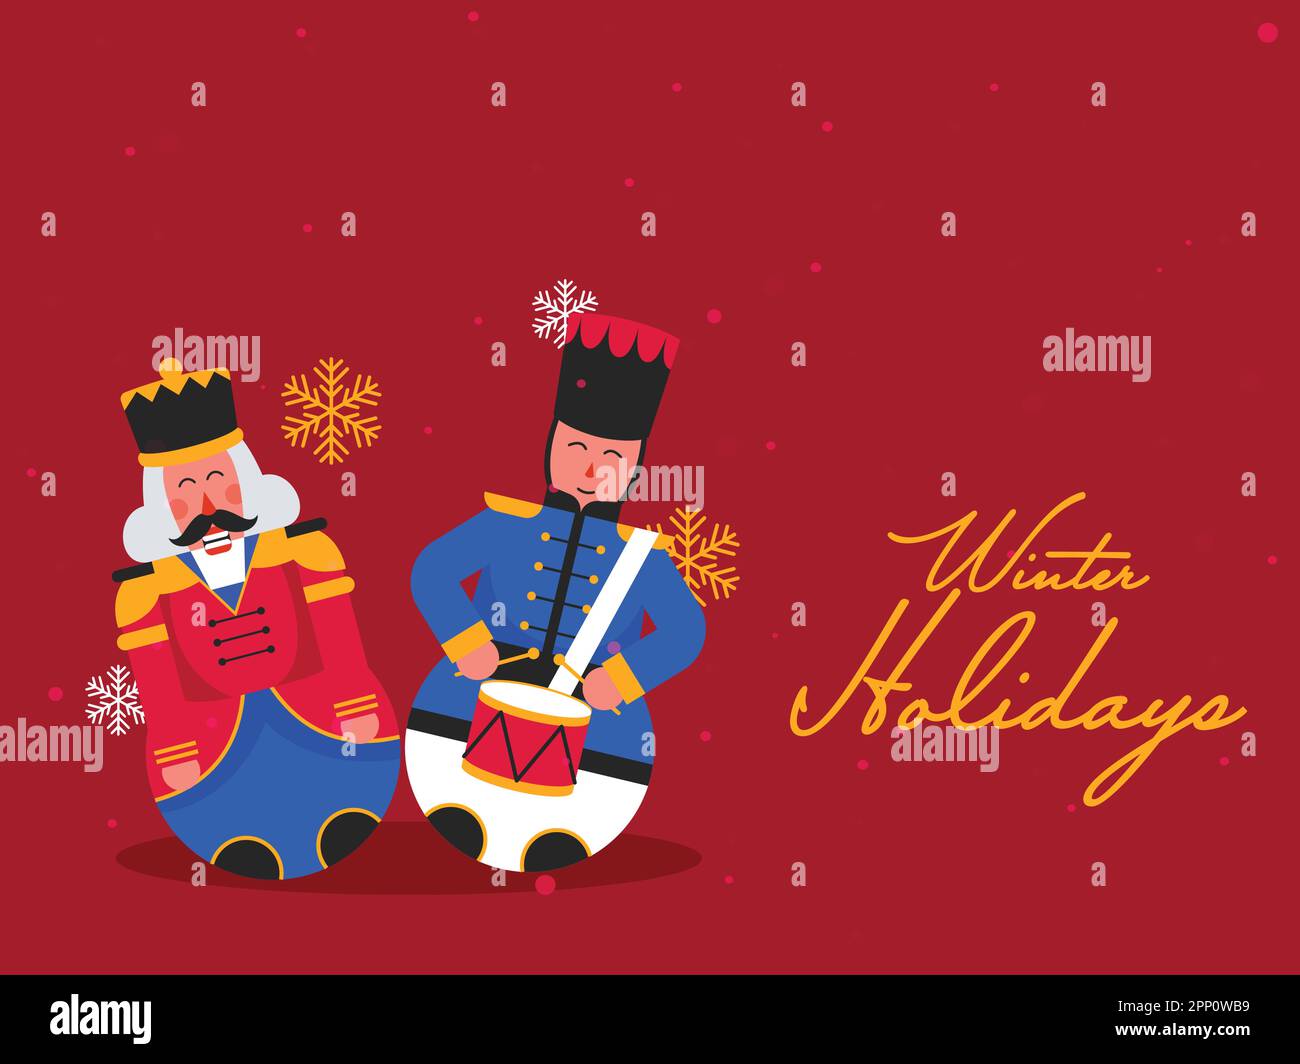 Winter Holidays Poster Design With Nutcracker Characters And Snowflakes On Red Background. Stock Vector